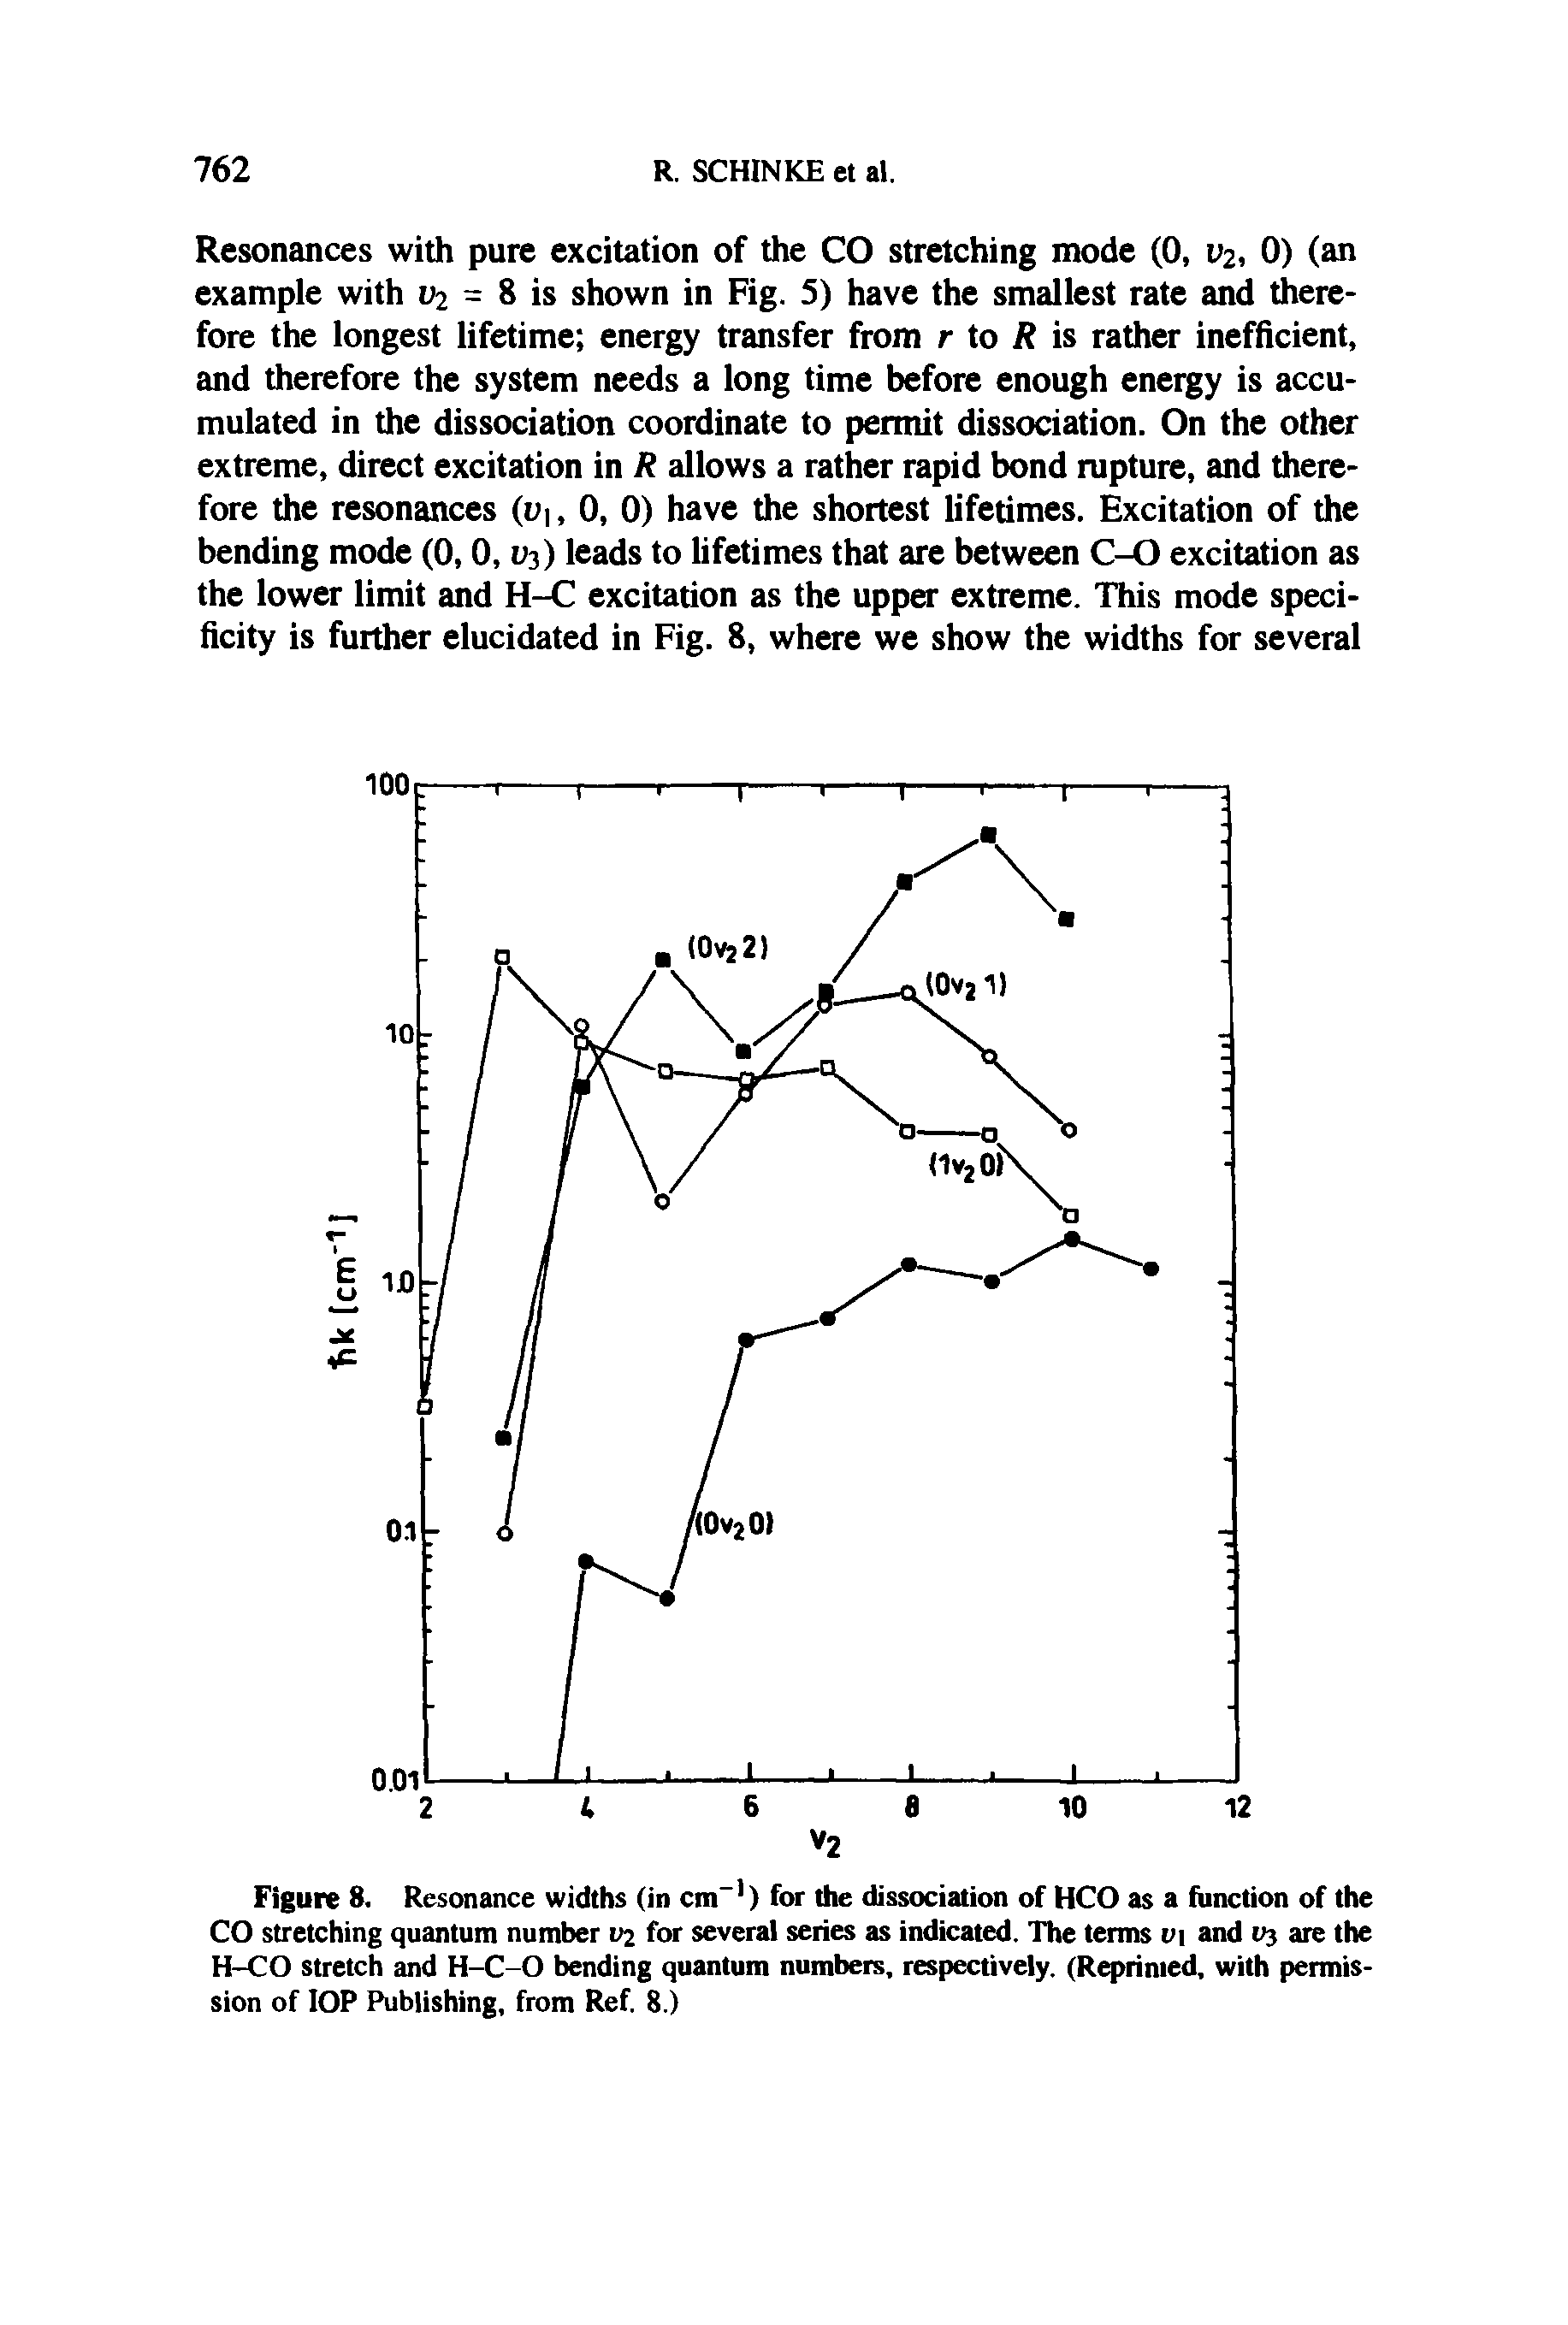 Figure 8. Resonance widths (in cm-1) for the dissociation of HCO as a function of the CO stretching quantum number V2 for several series as indicated. The terms ui and vj are the H-CO stretch and H-C-O bending quantum numbers, respectively. (Reprinted, with permission of IOP Publishing, from Ref. 8.)...